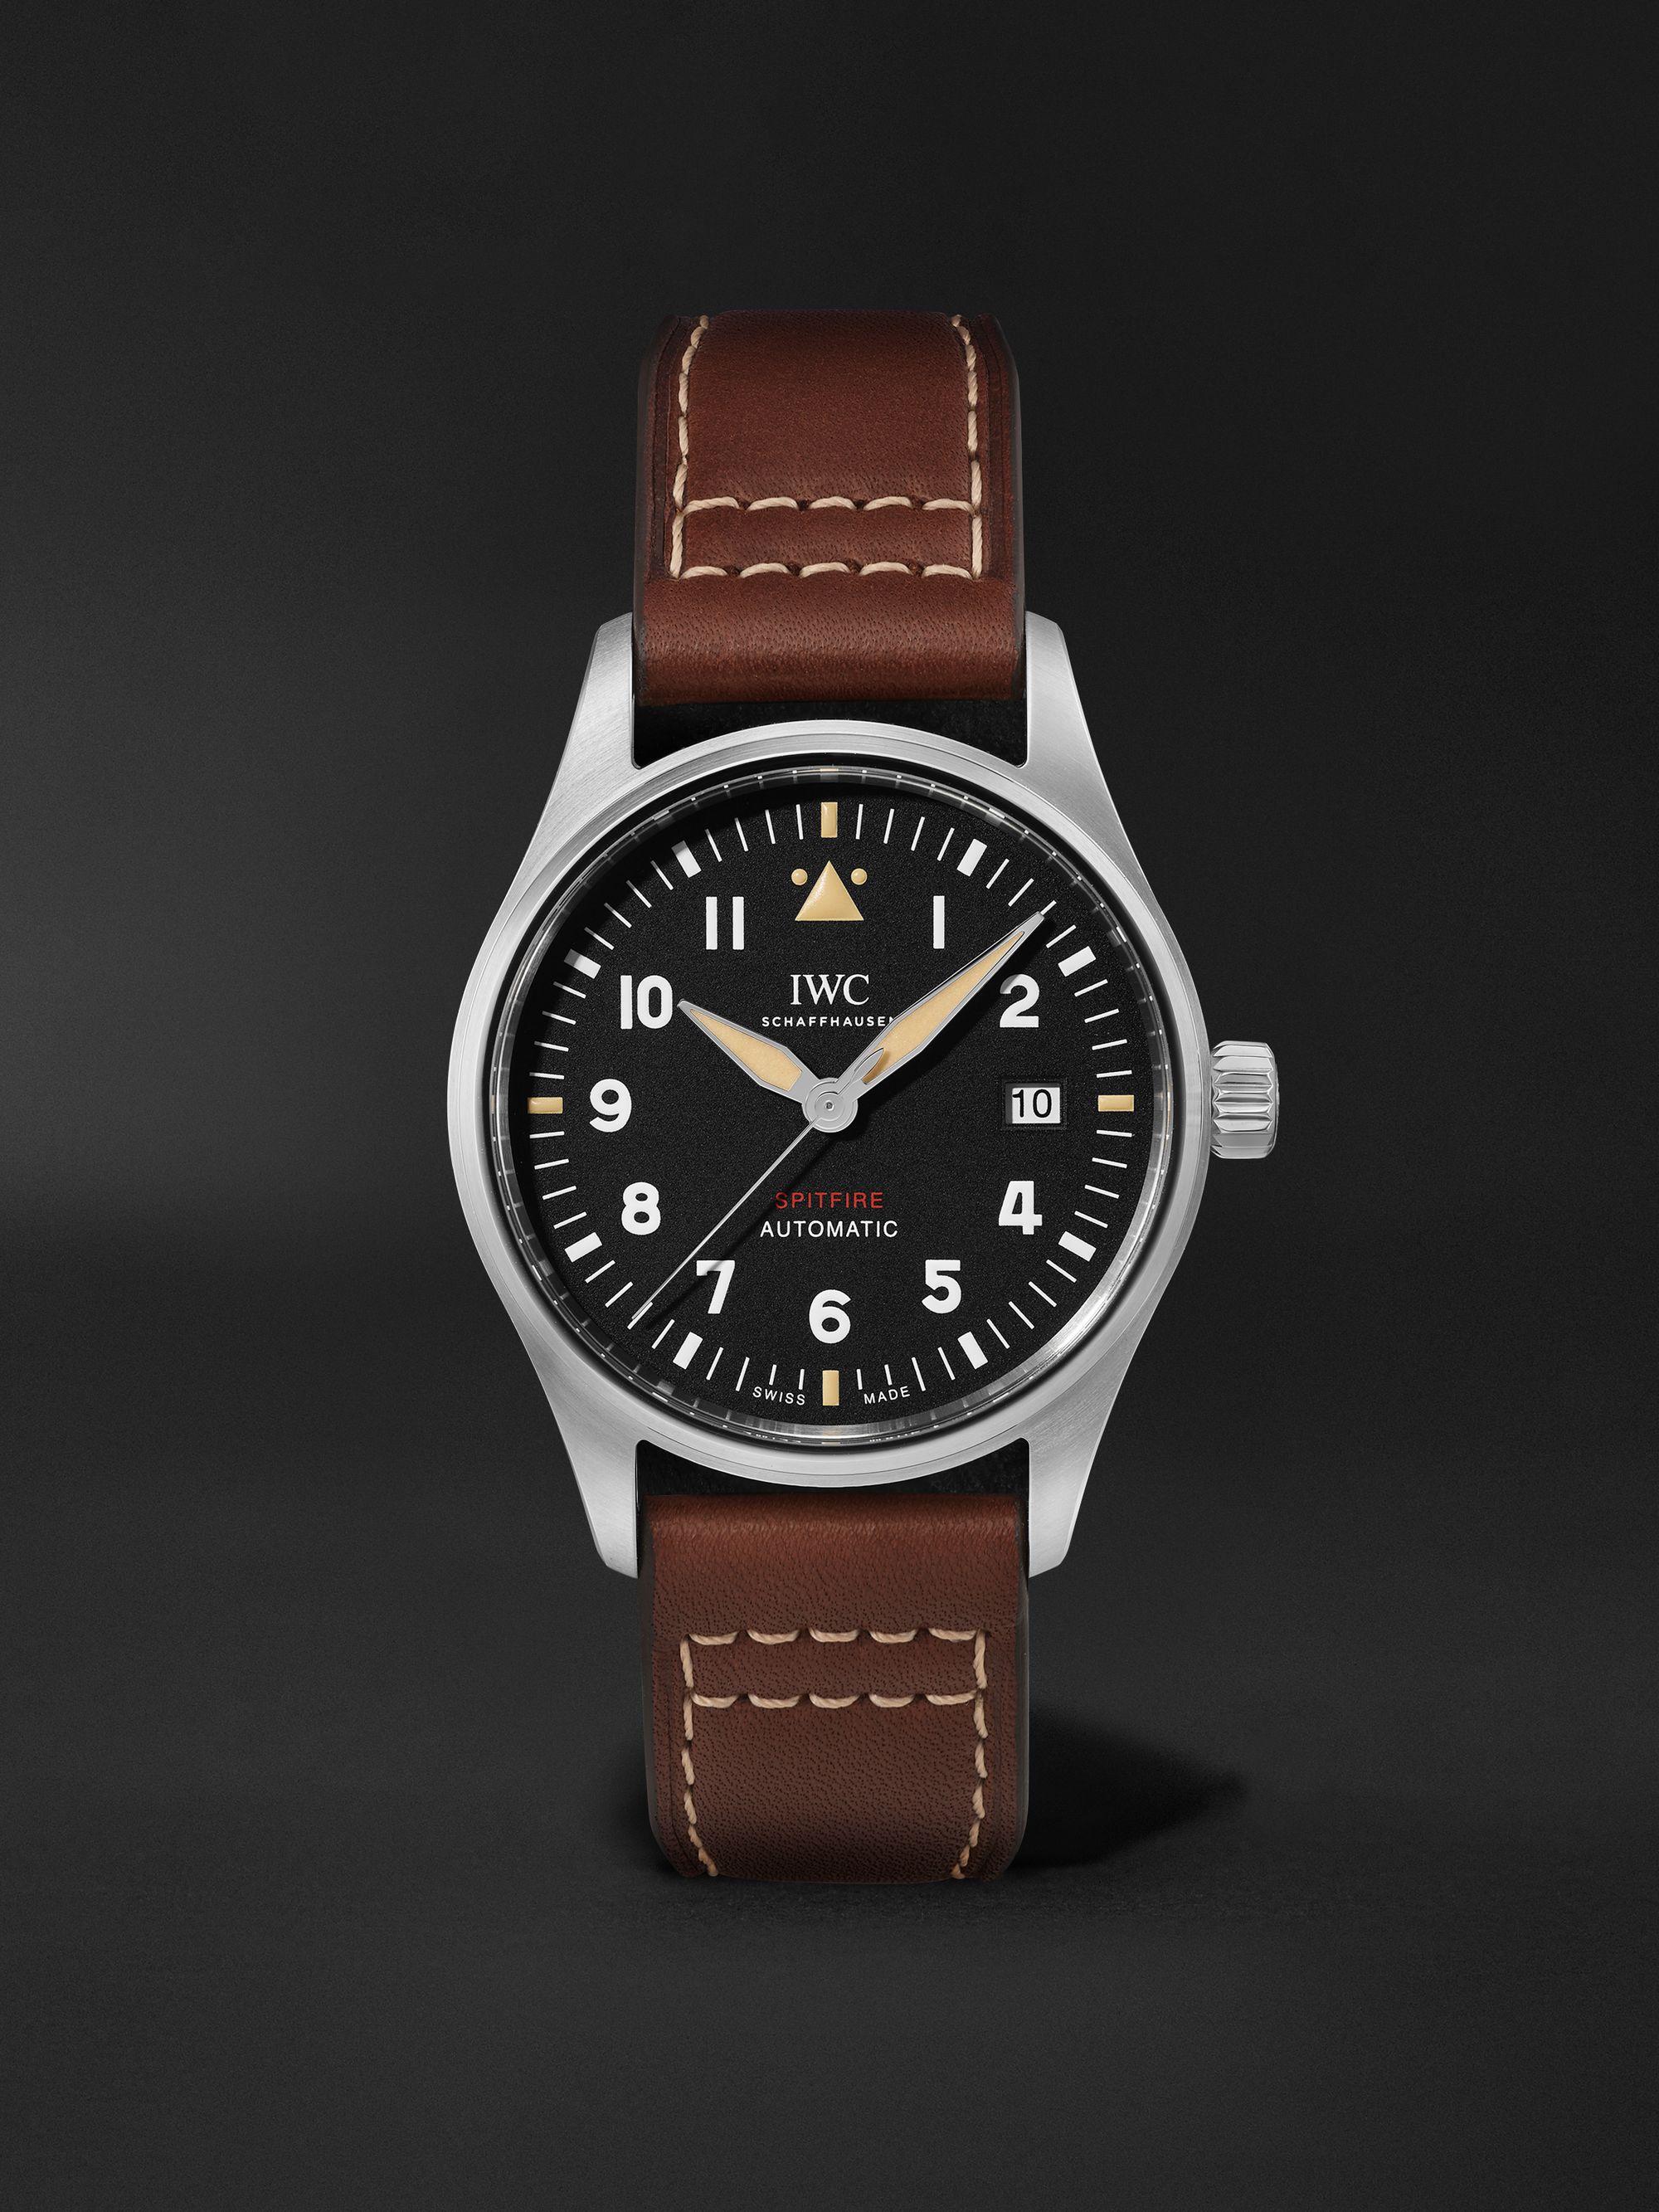 IWC SCHAFFHAUSEN Pilot's Spitfire Automatic 39mm Stainless Steel and Leather Watch, Ref. No. IW326803